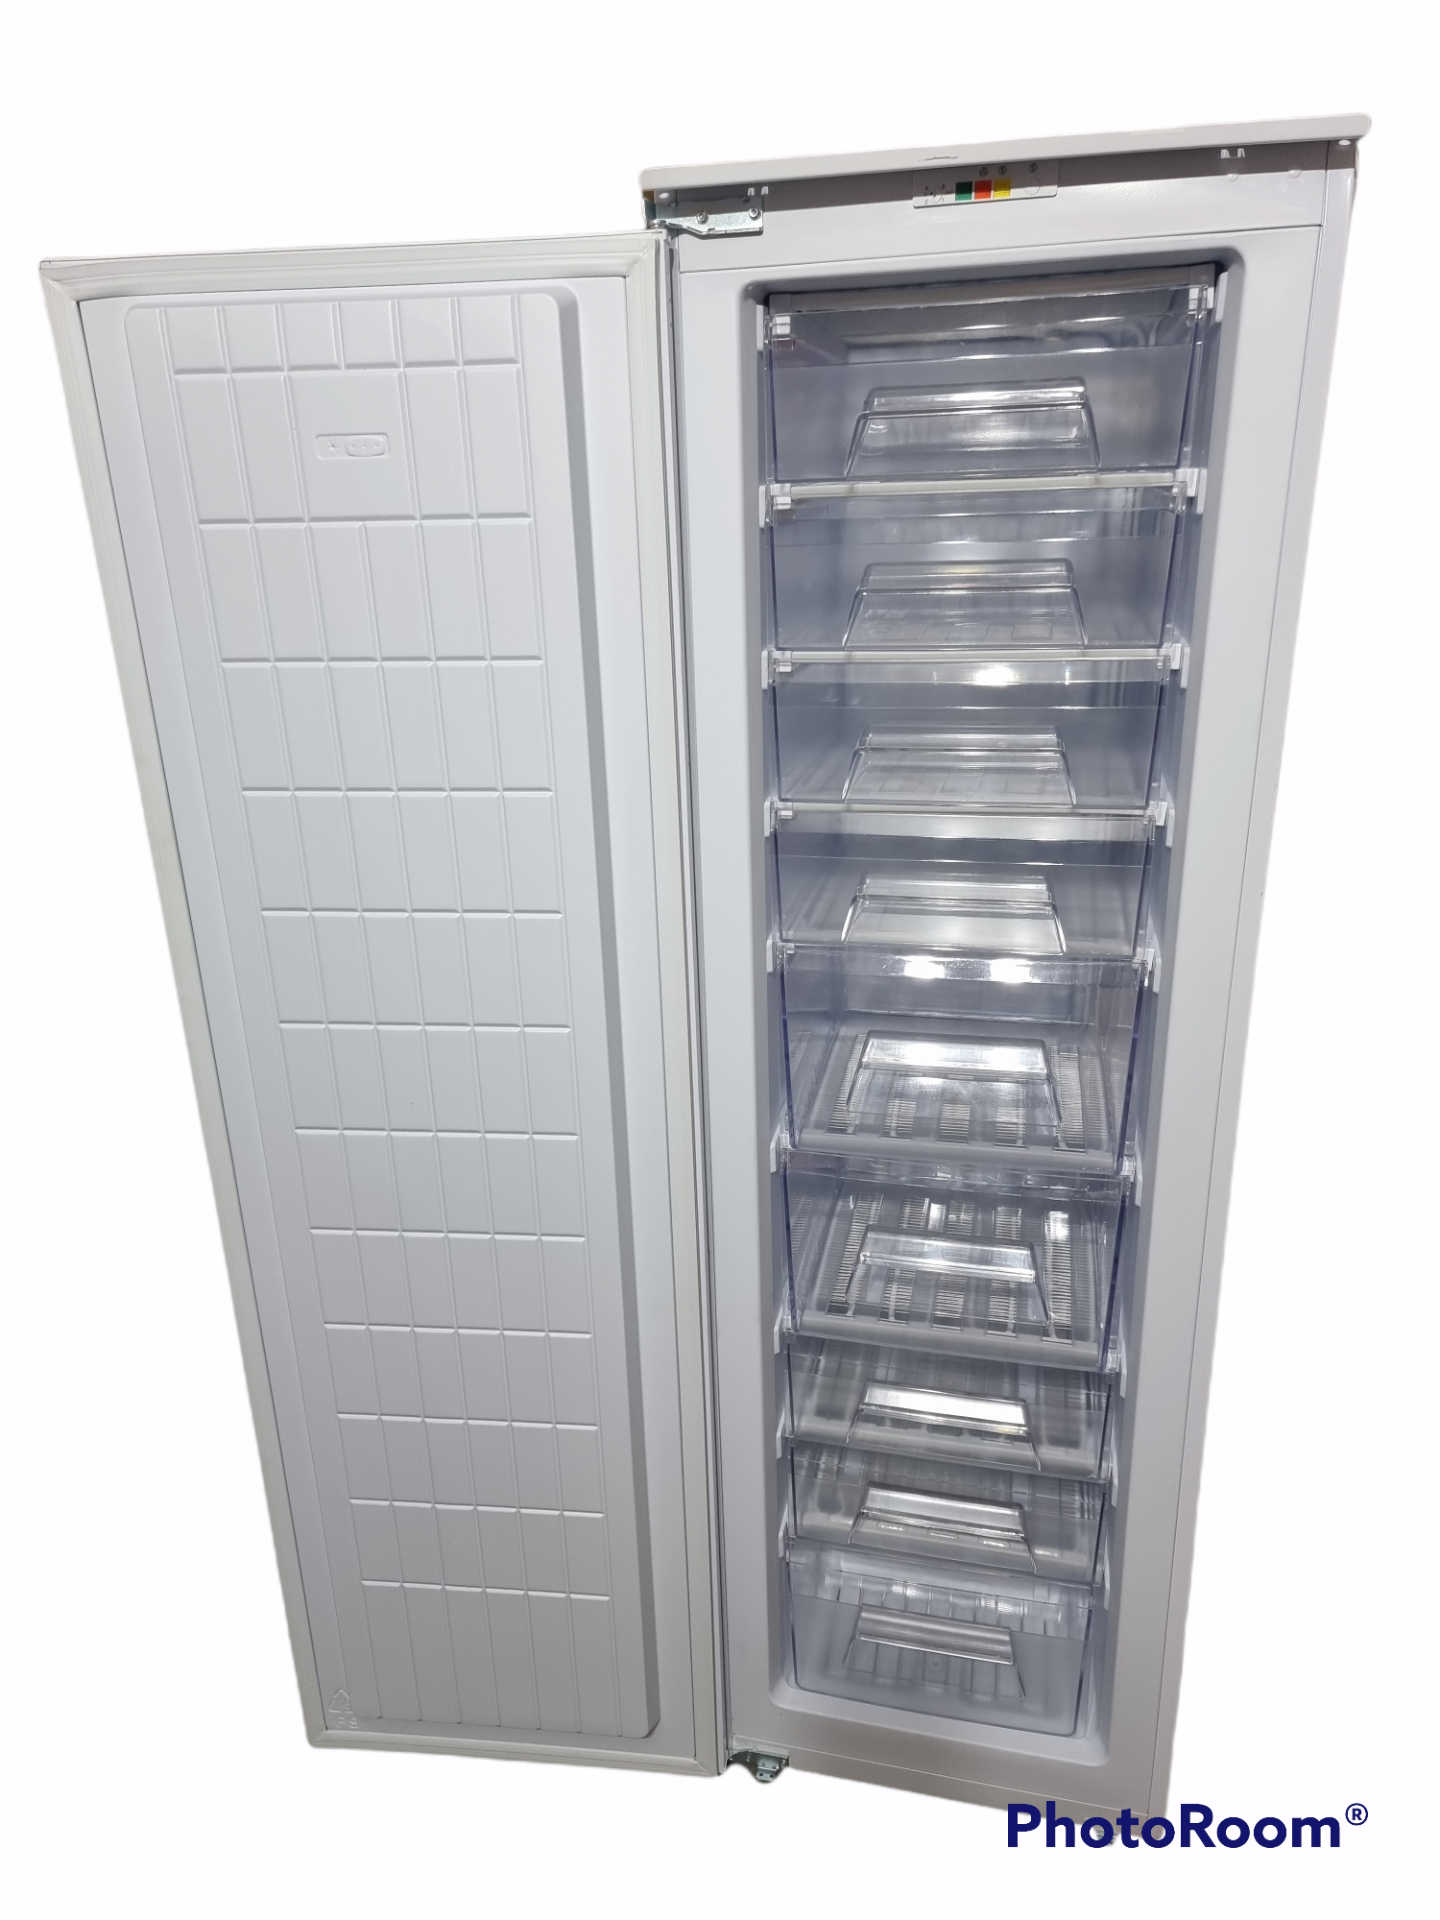 Prima PRRF209 200Litres Integrated Freezer White RRP £509